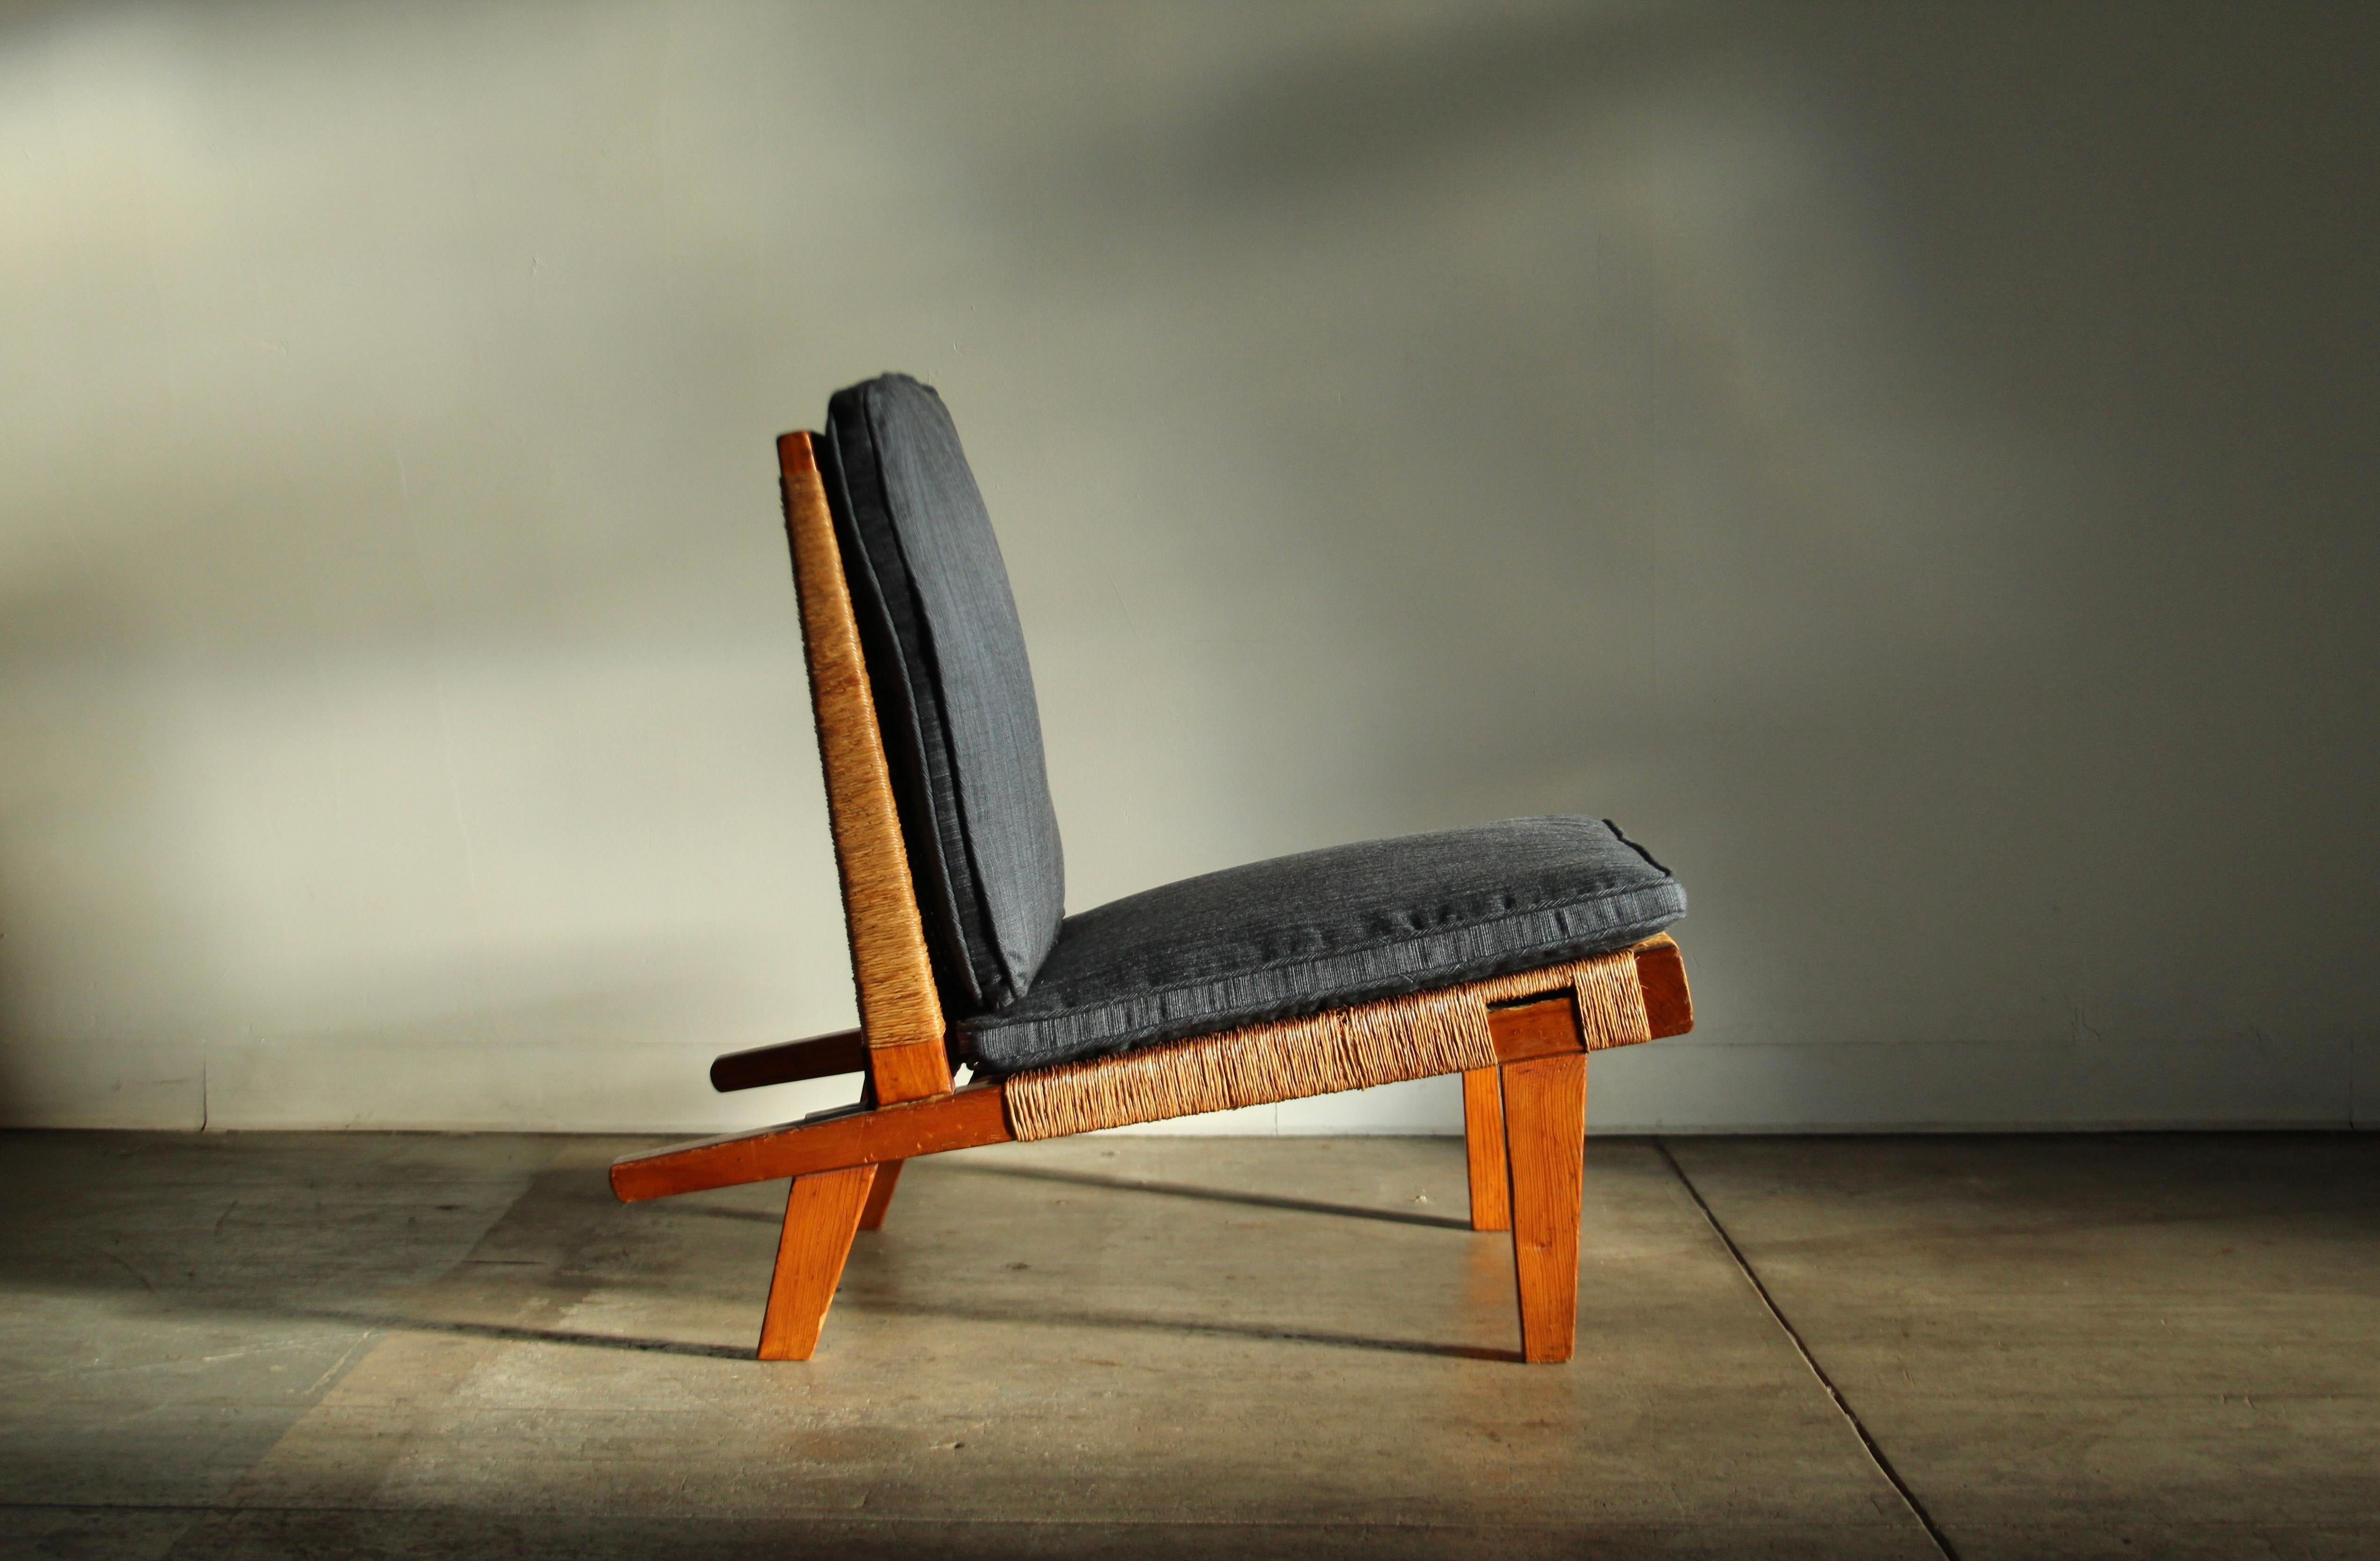 An uncommon and stunning lounge chair designed by American Bauhaus designer Michael van Beuren in Mexico in the 1940s. Warm pine frame with original handwoven palm fiber seat and back. Hand forged iron bracket on back with original flathead screws.